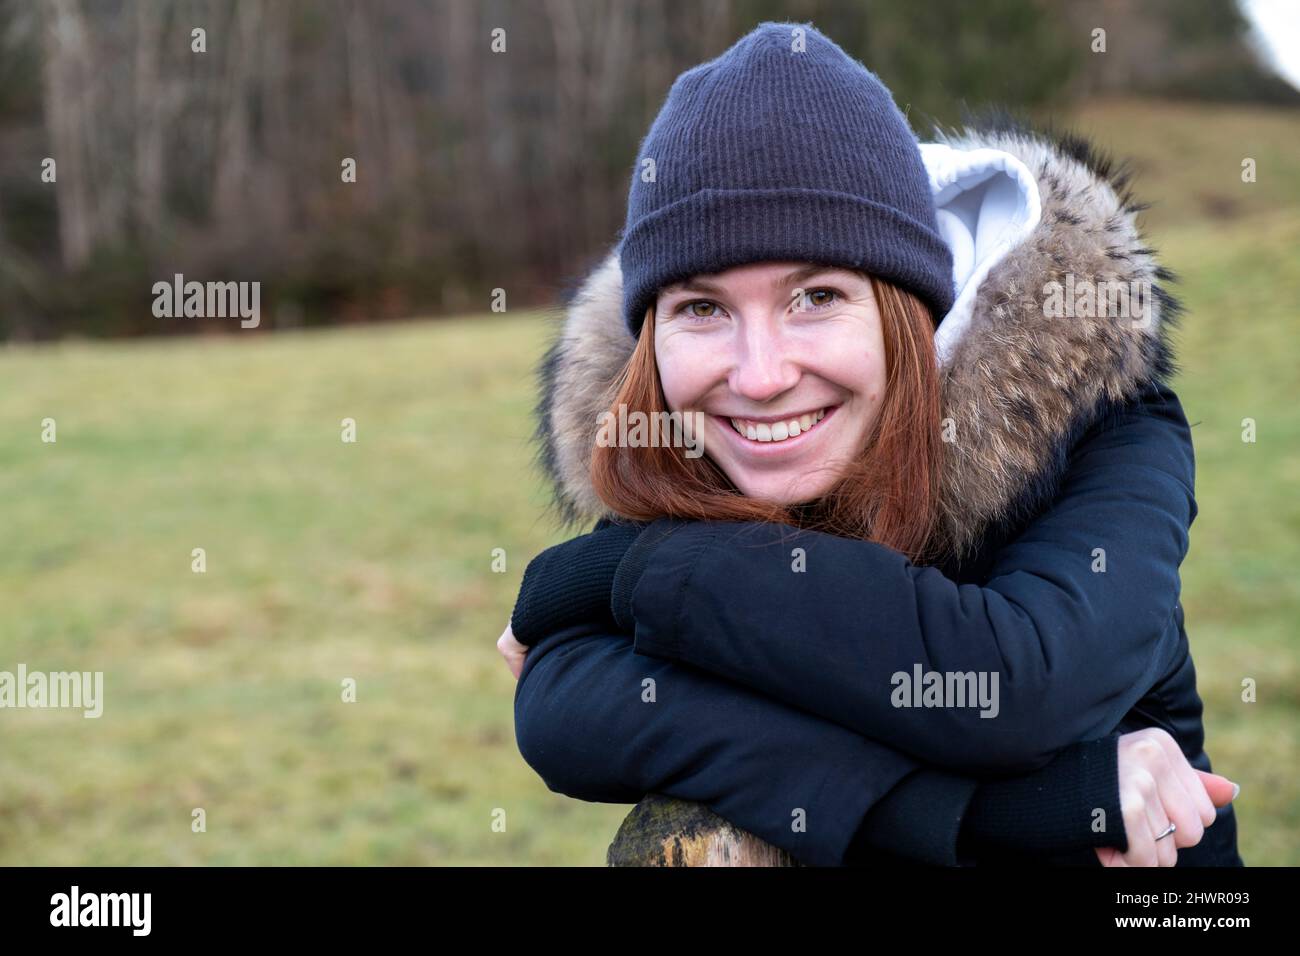 Smiling young woman with warm clothing and knit hat Stock Photo